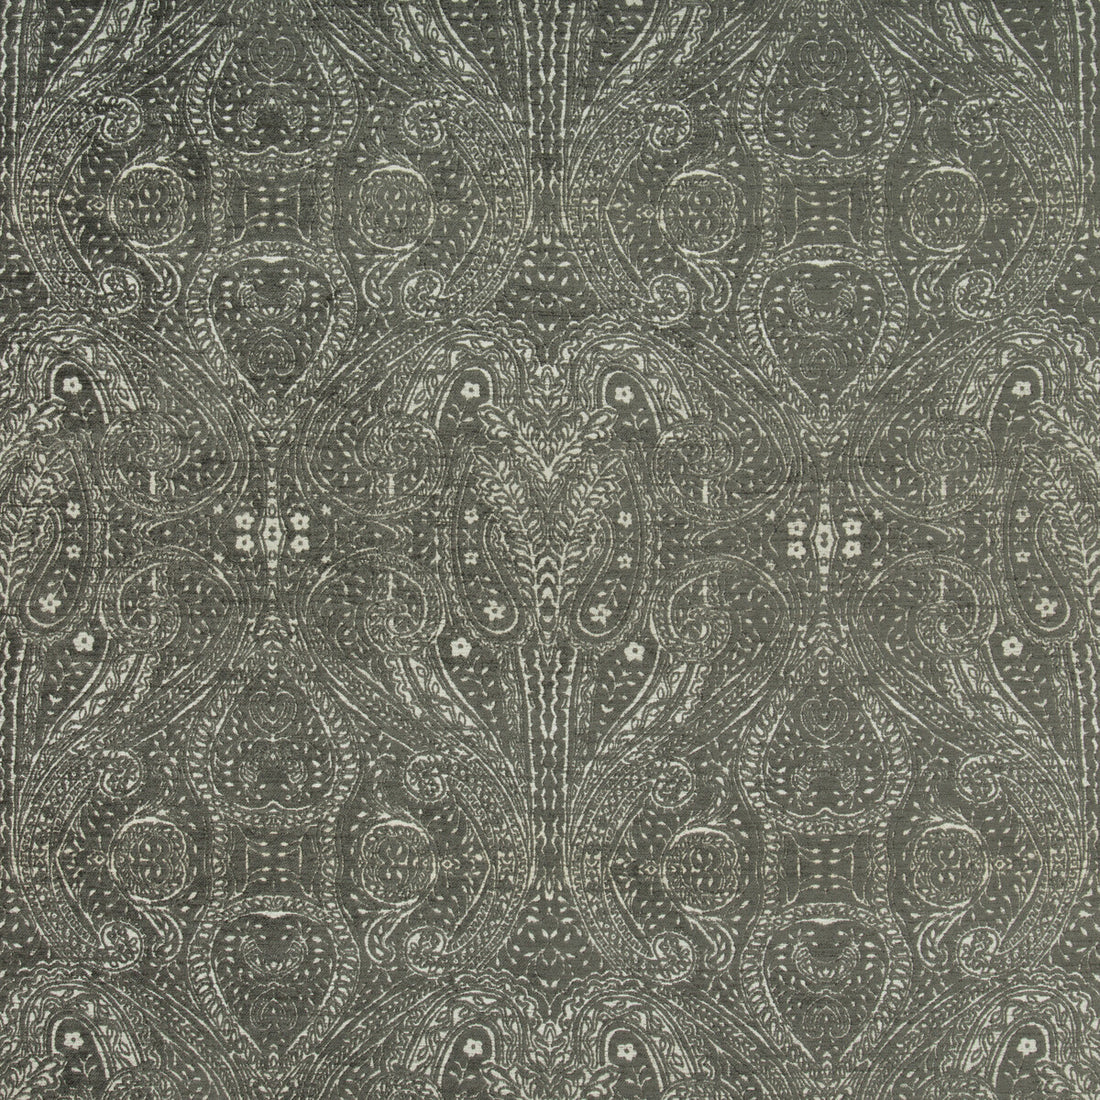 Kravet Contract fabric in 35015-21 color - pattern 35015.21.0 - by Kravet Contract in the Incase Crypton Gis collection